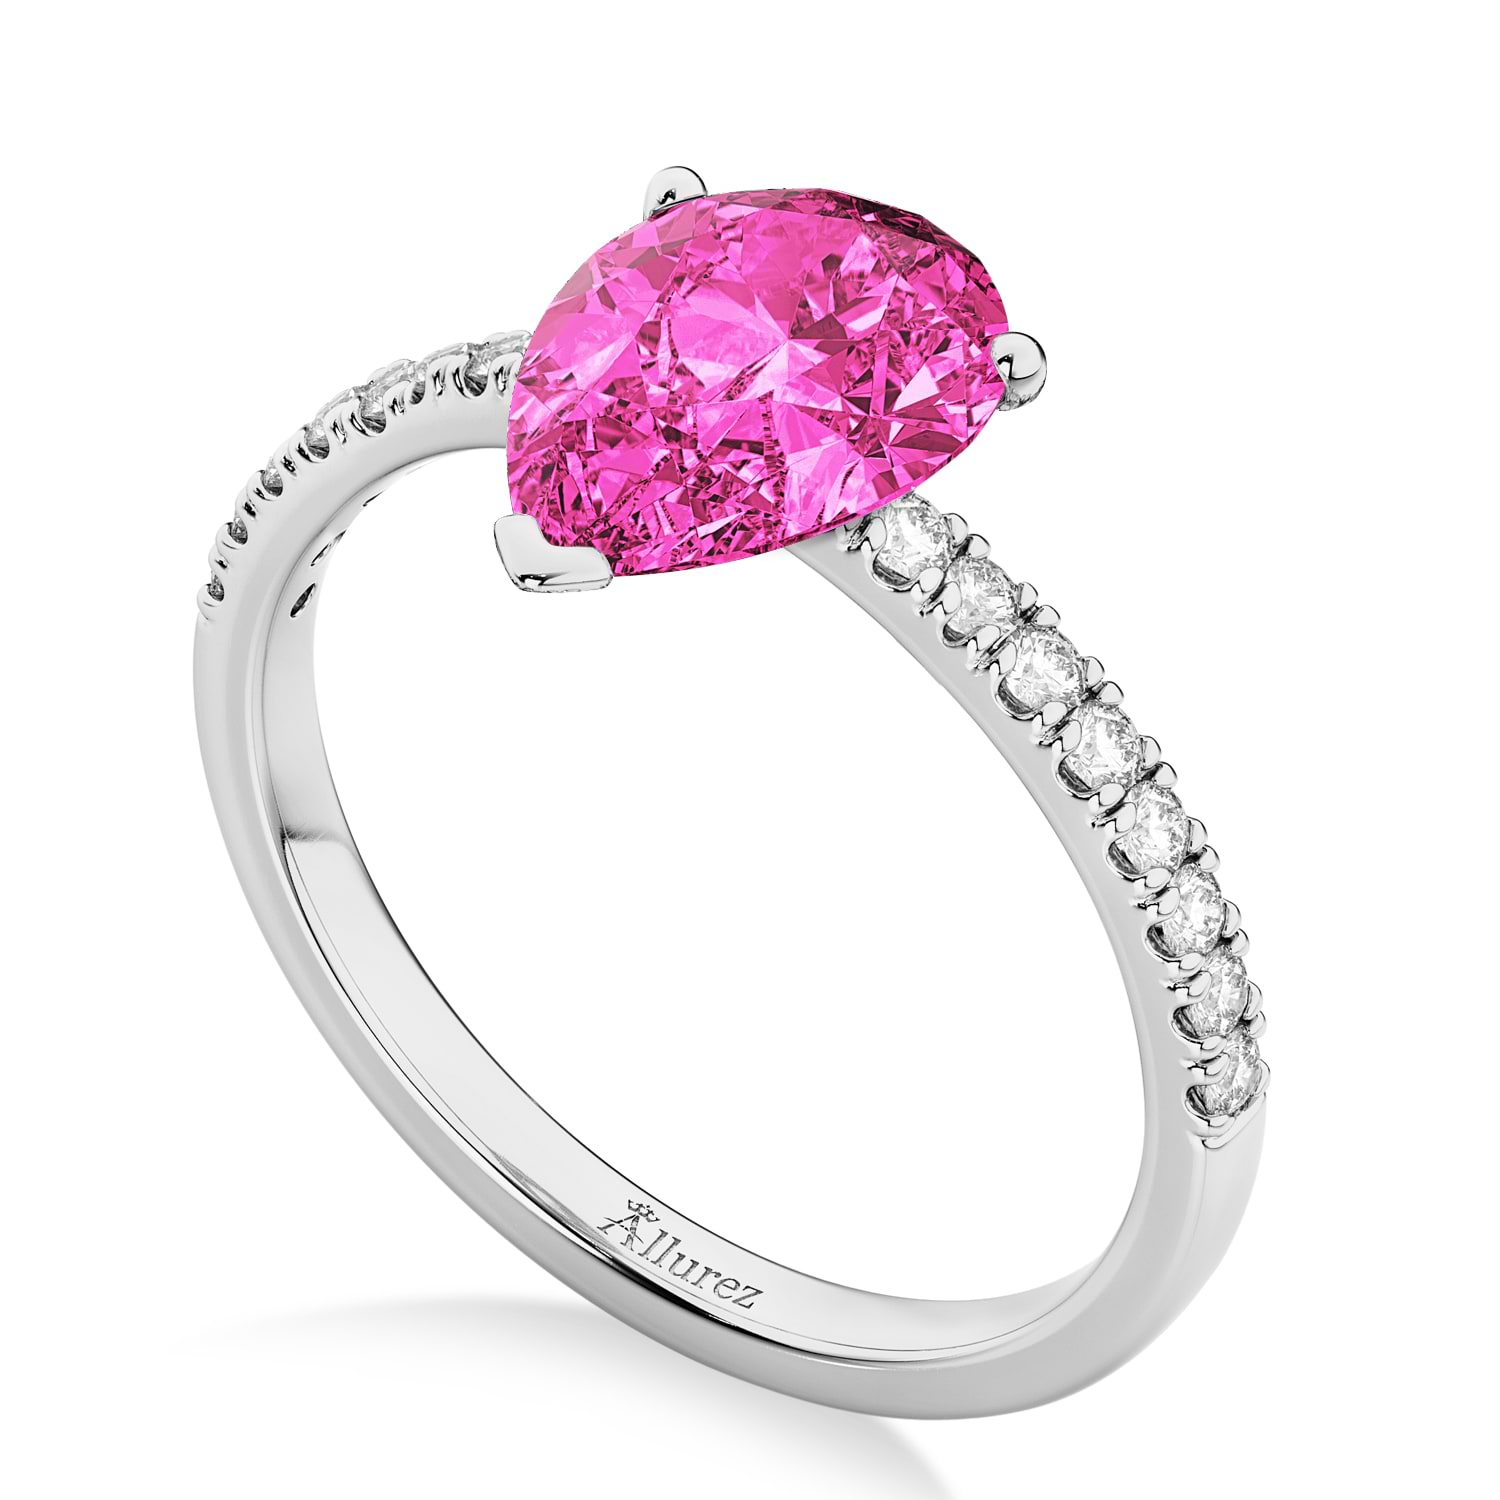 Pear Cut Sidestone Accented Pink Tourmaline & Diamond Engagement Ring 14K White Gold 1.61ct